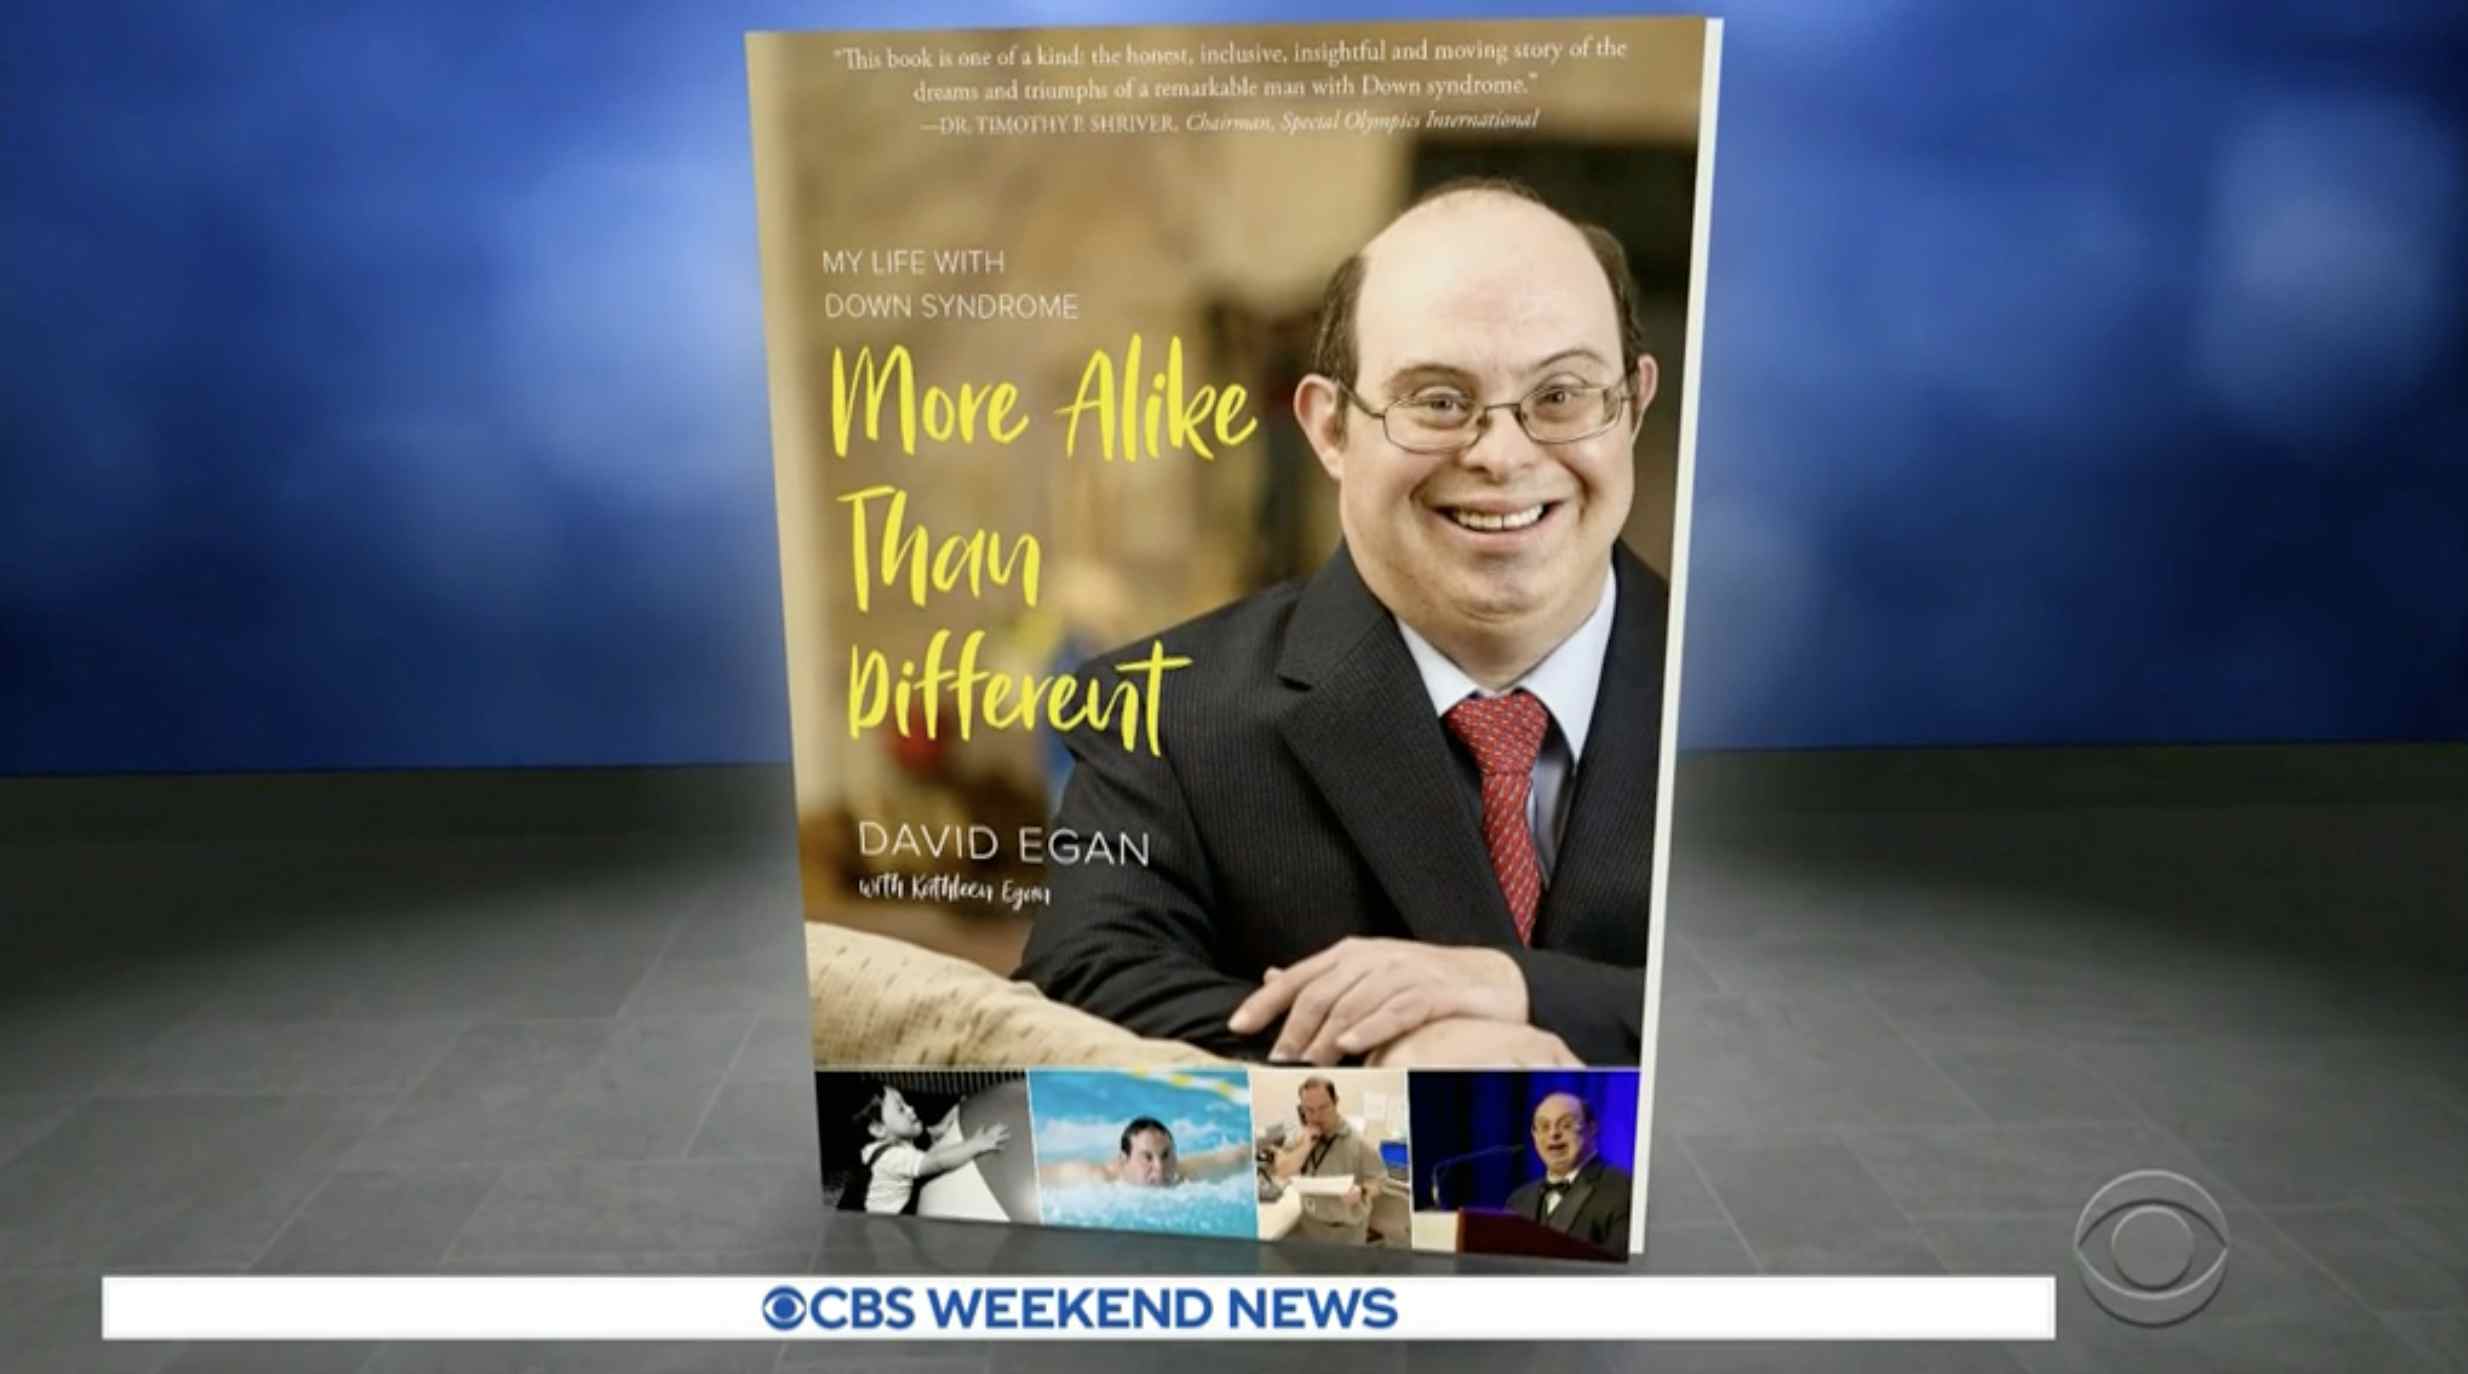 Disabilities advocate with Down syndrome publishes inspiring memoir